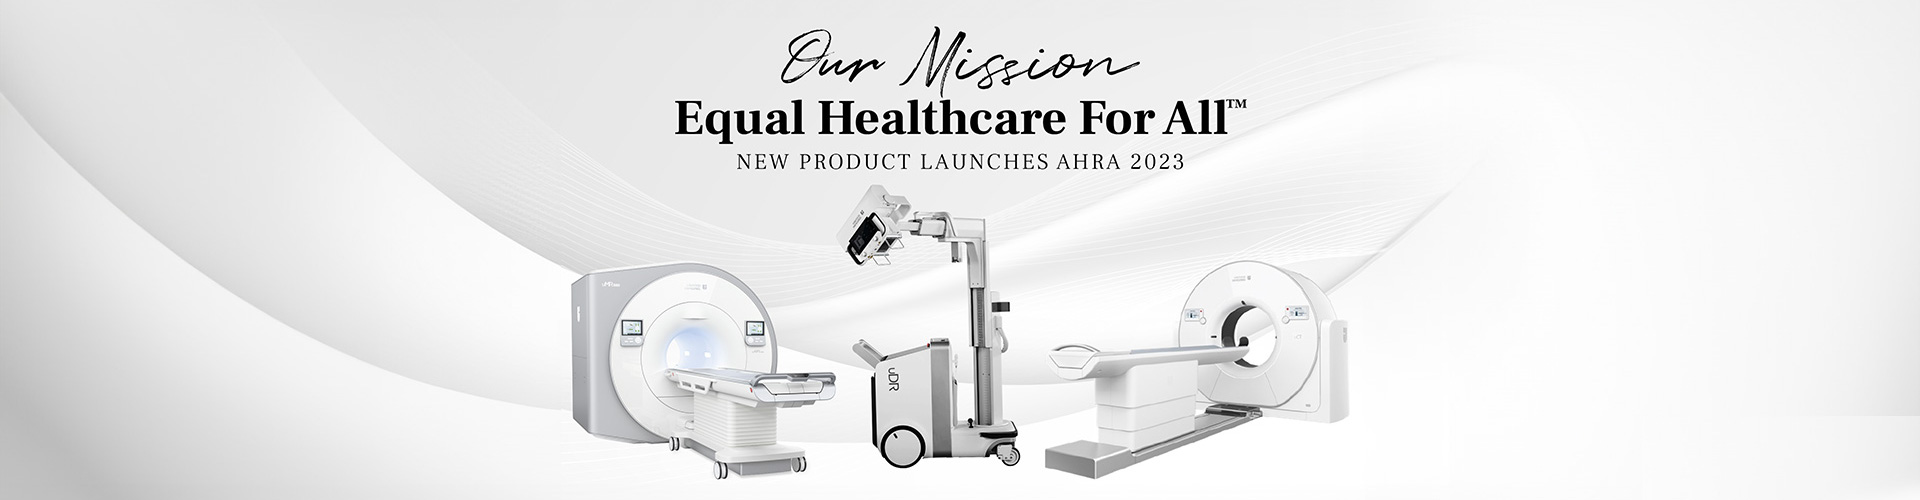 New Product Launches AHRA 2023